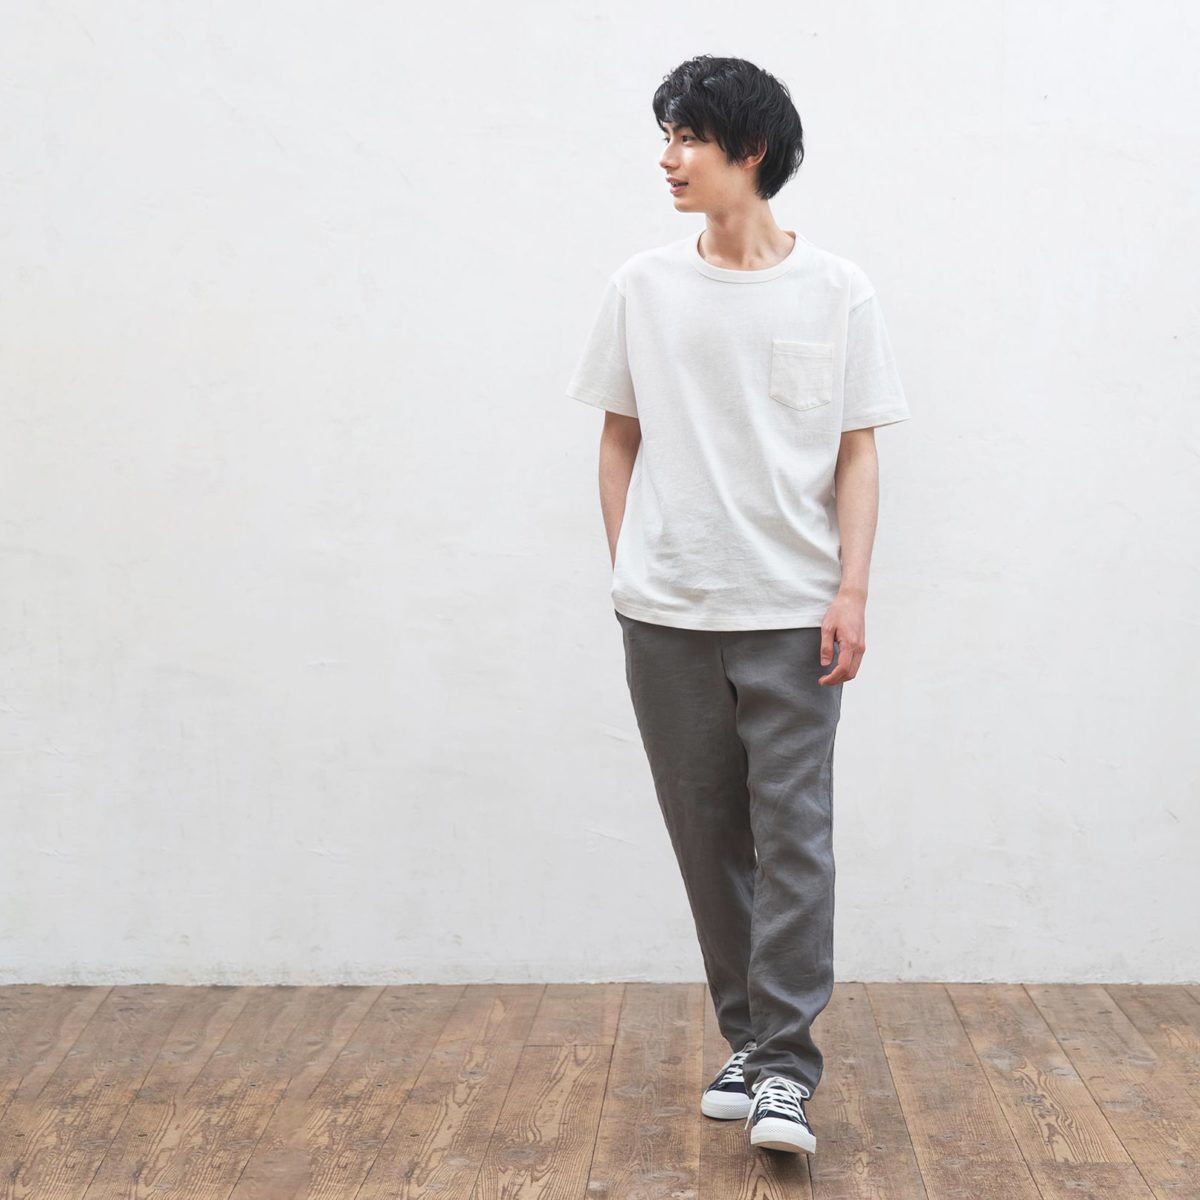 10 Best Japanese Clothing Brands - Must Read This Before Buying